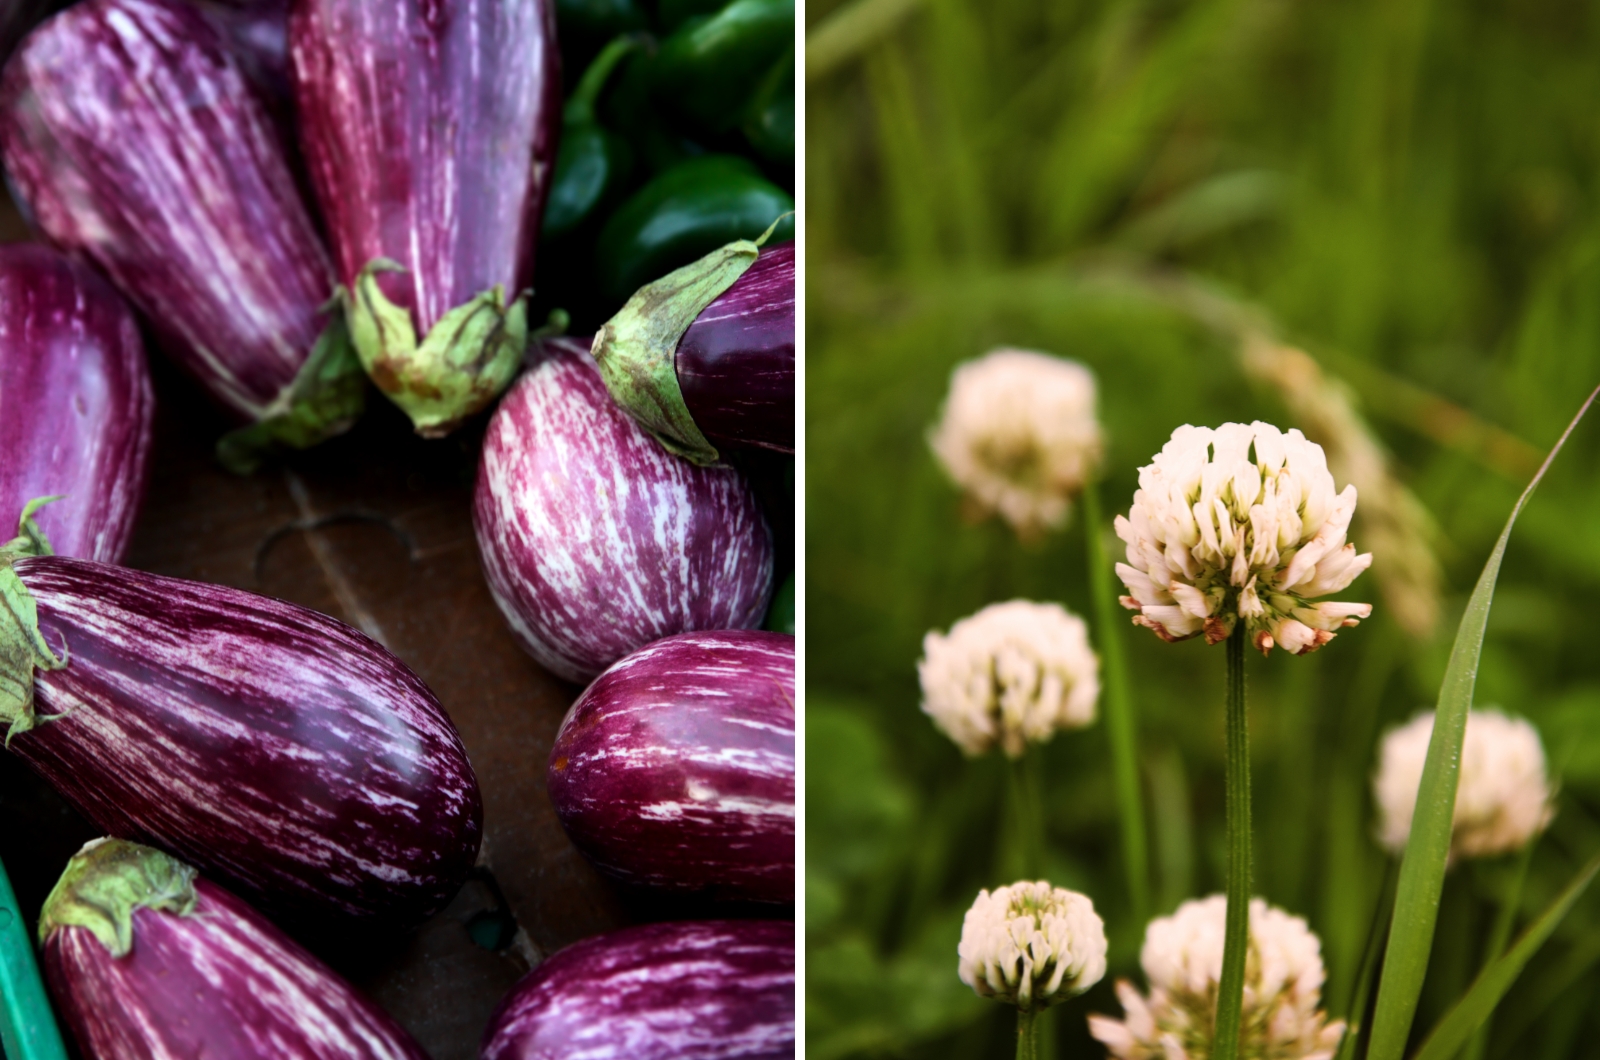 eggplant and white clover